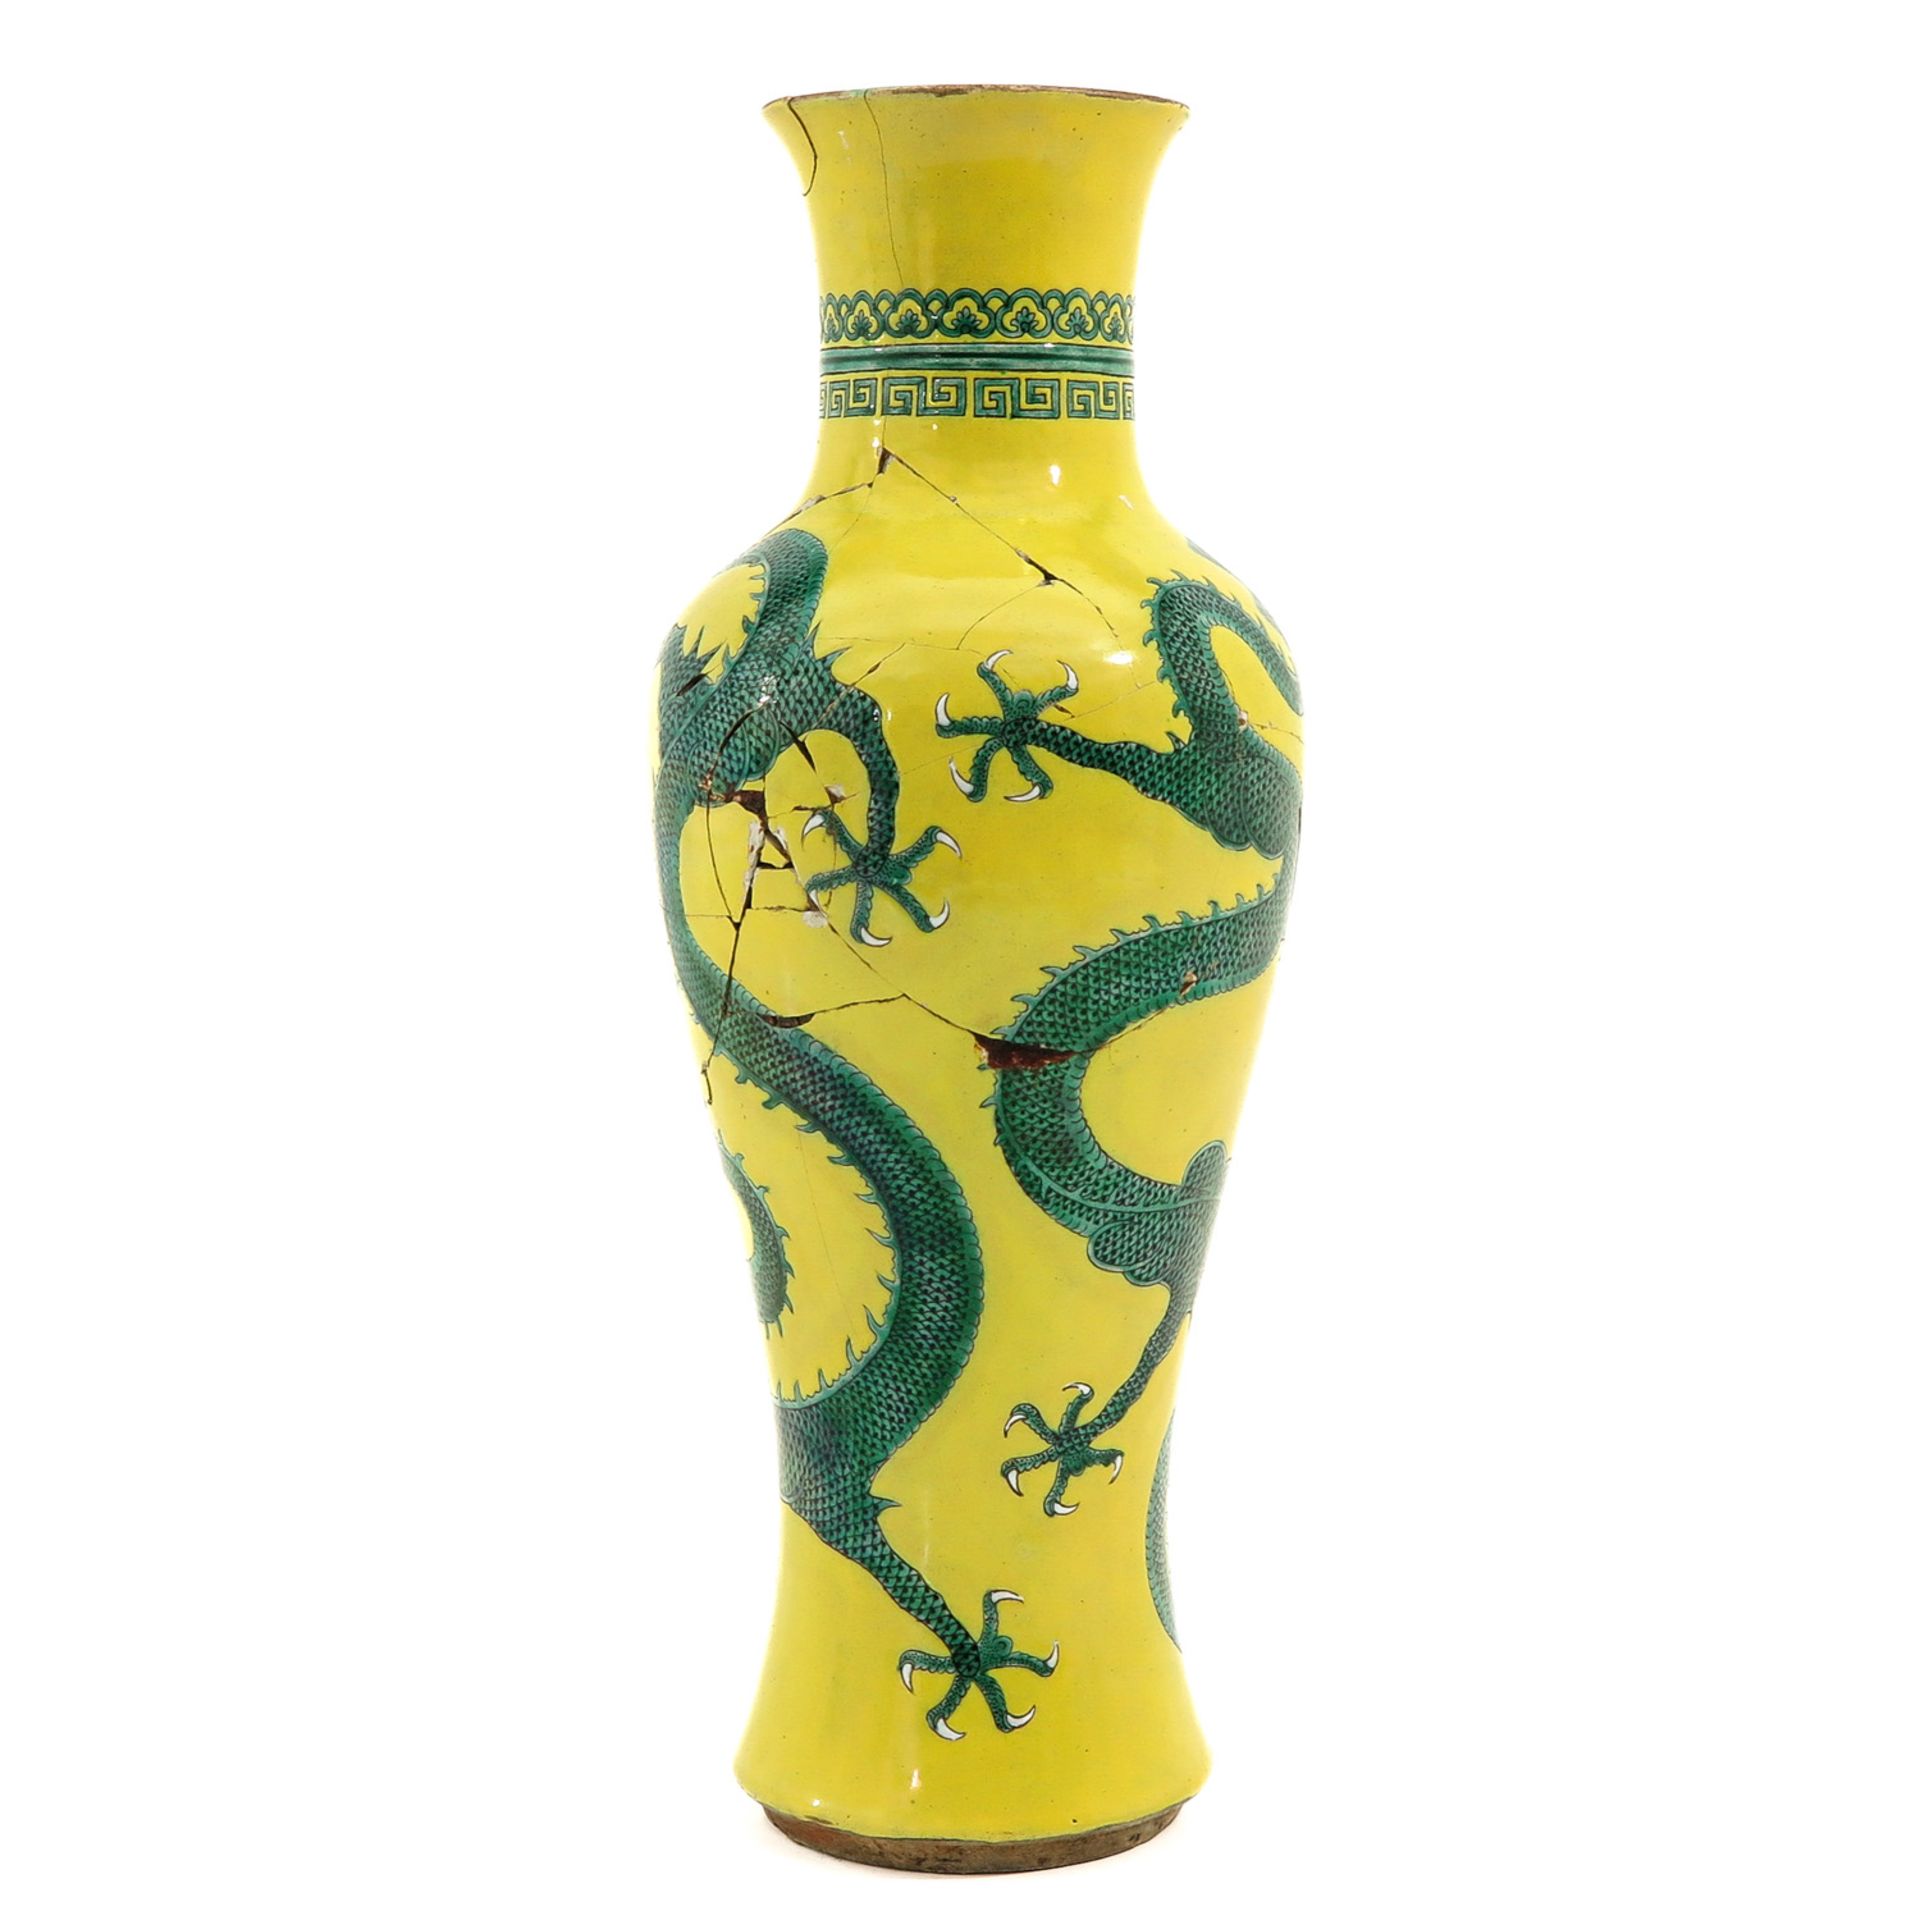 A Yellow and Green Dragon Vase - Image 5 of 10